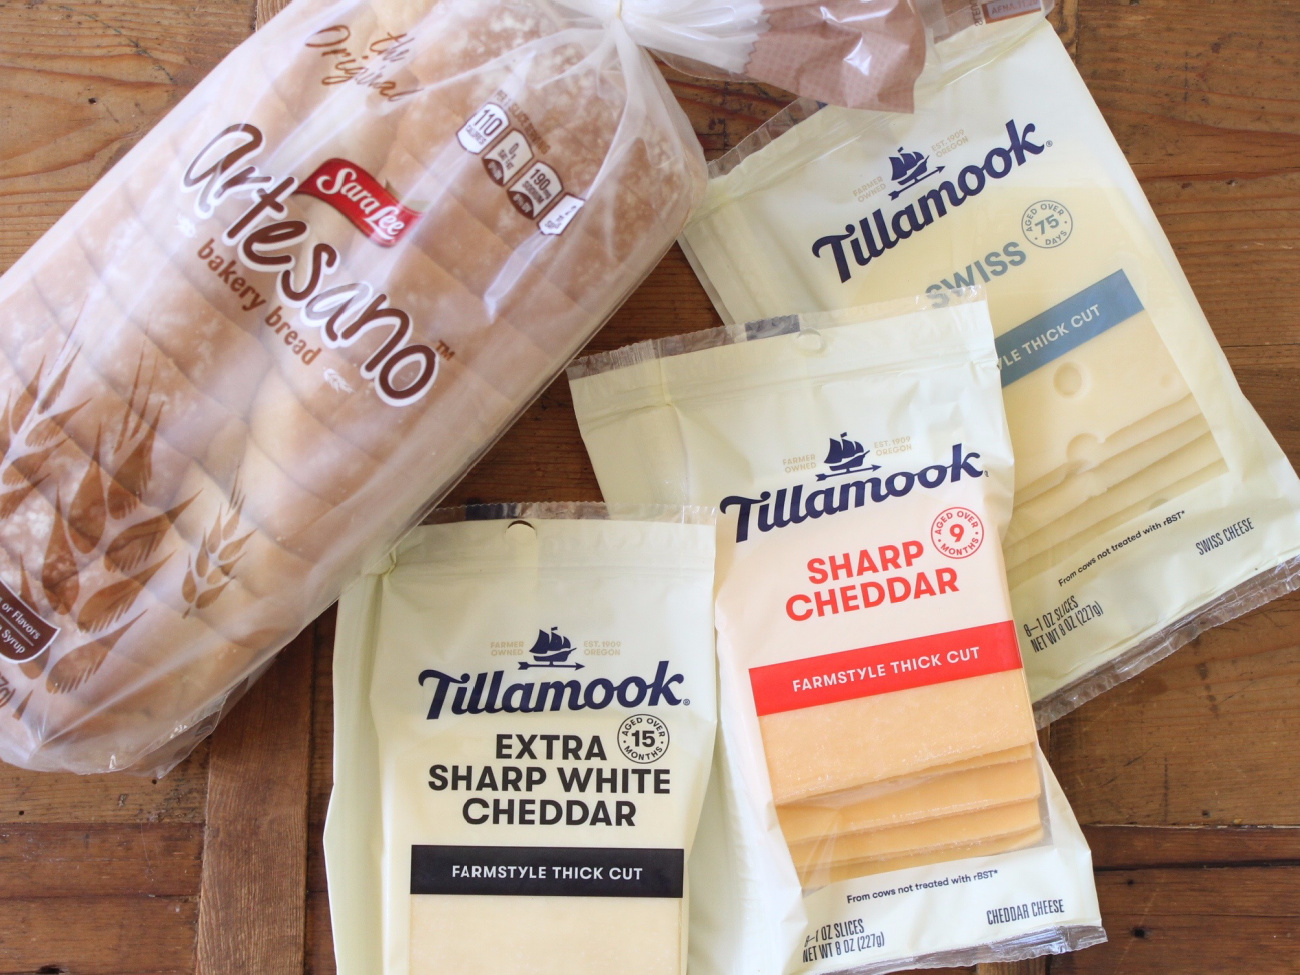 Don’t Miss Your Chance To Save On Delicious Tillamook Cheese & Upgrade Your Grilled Cheese